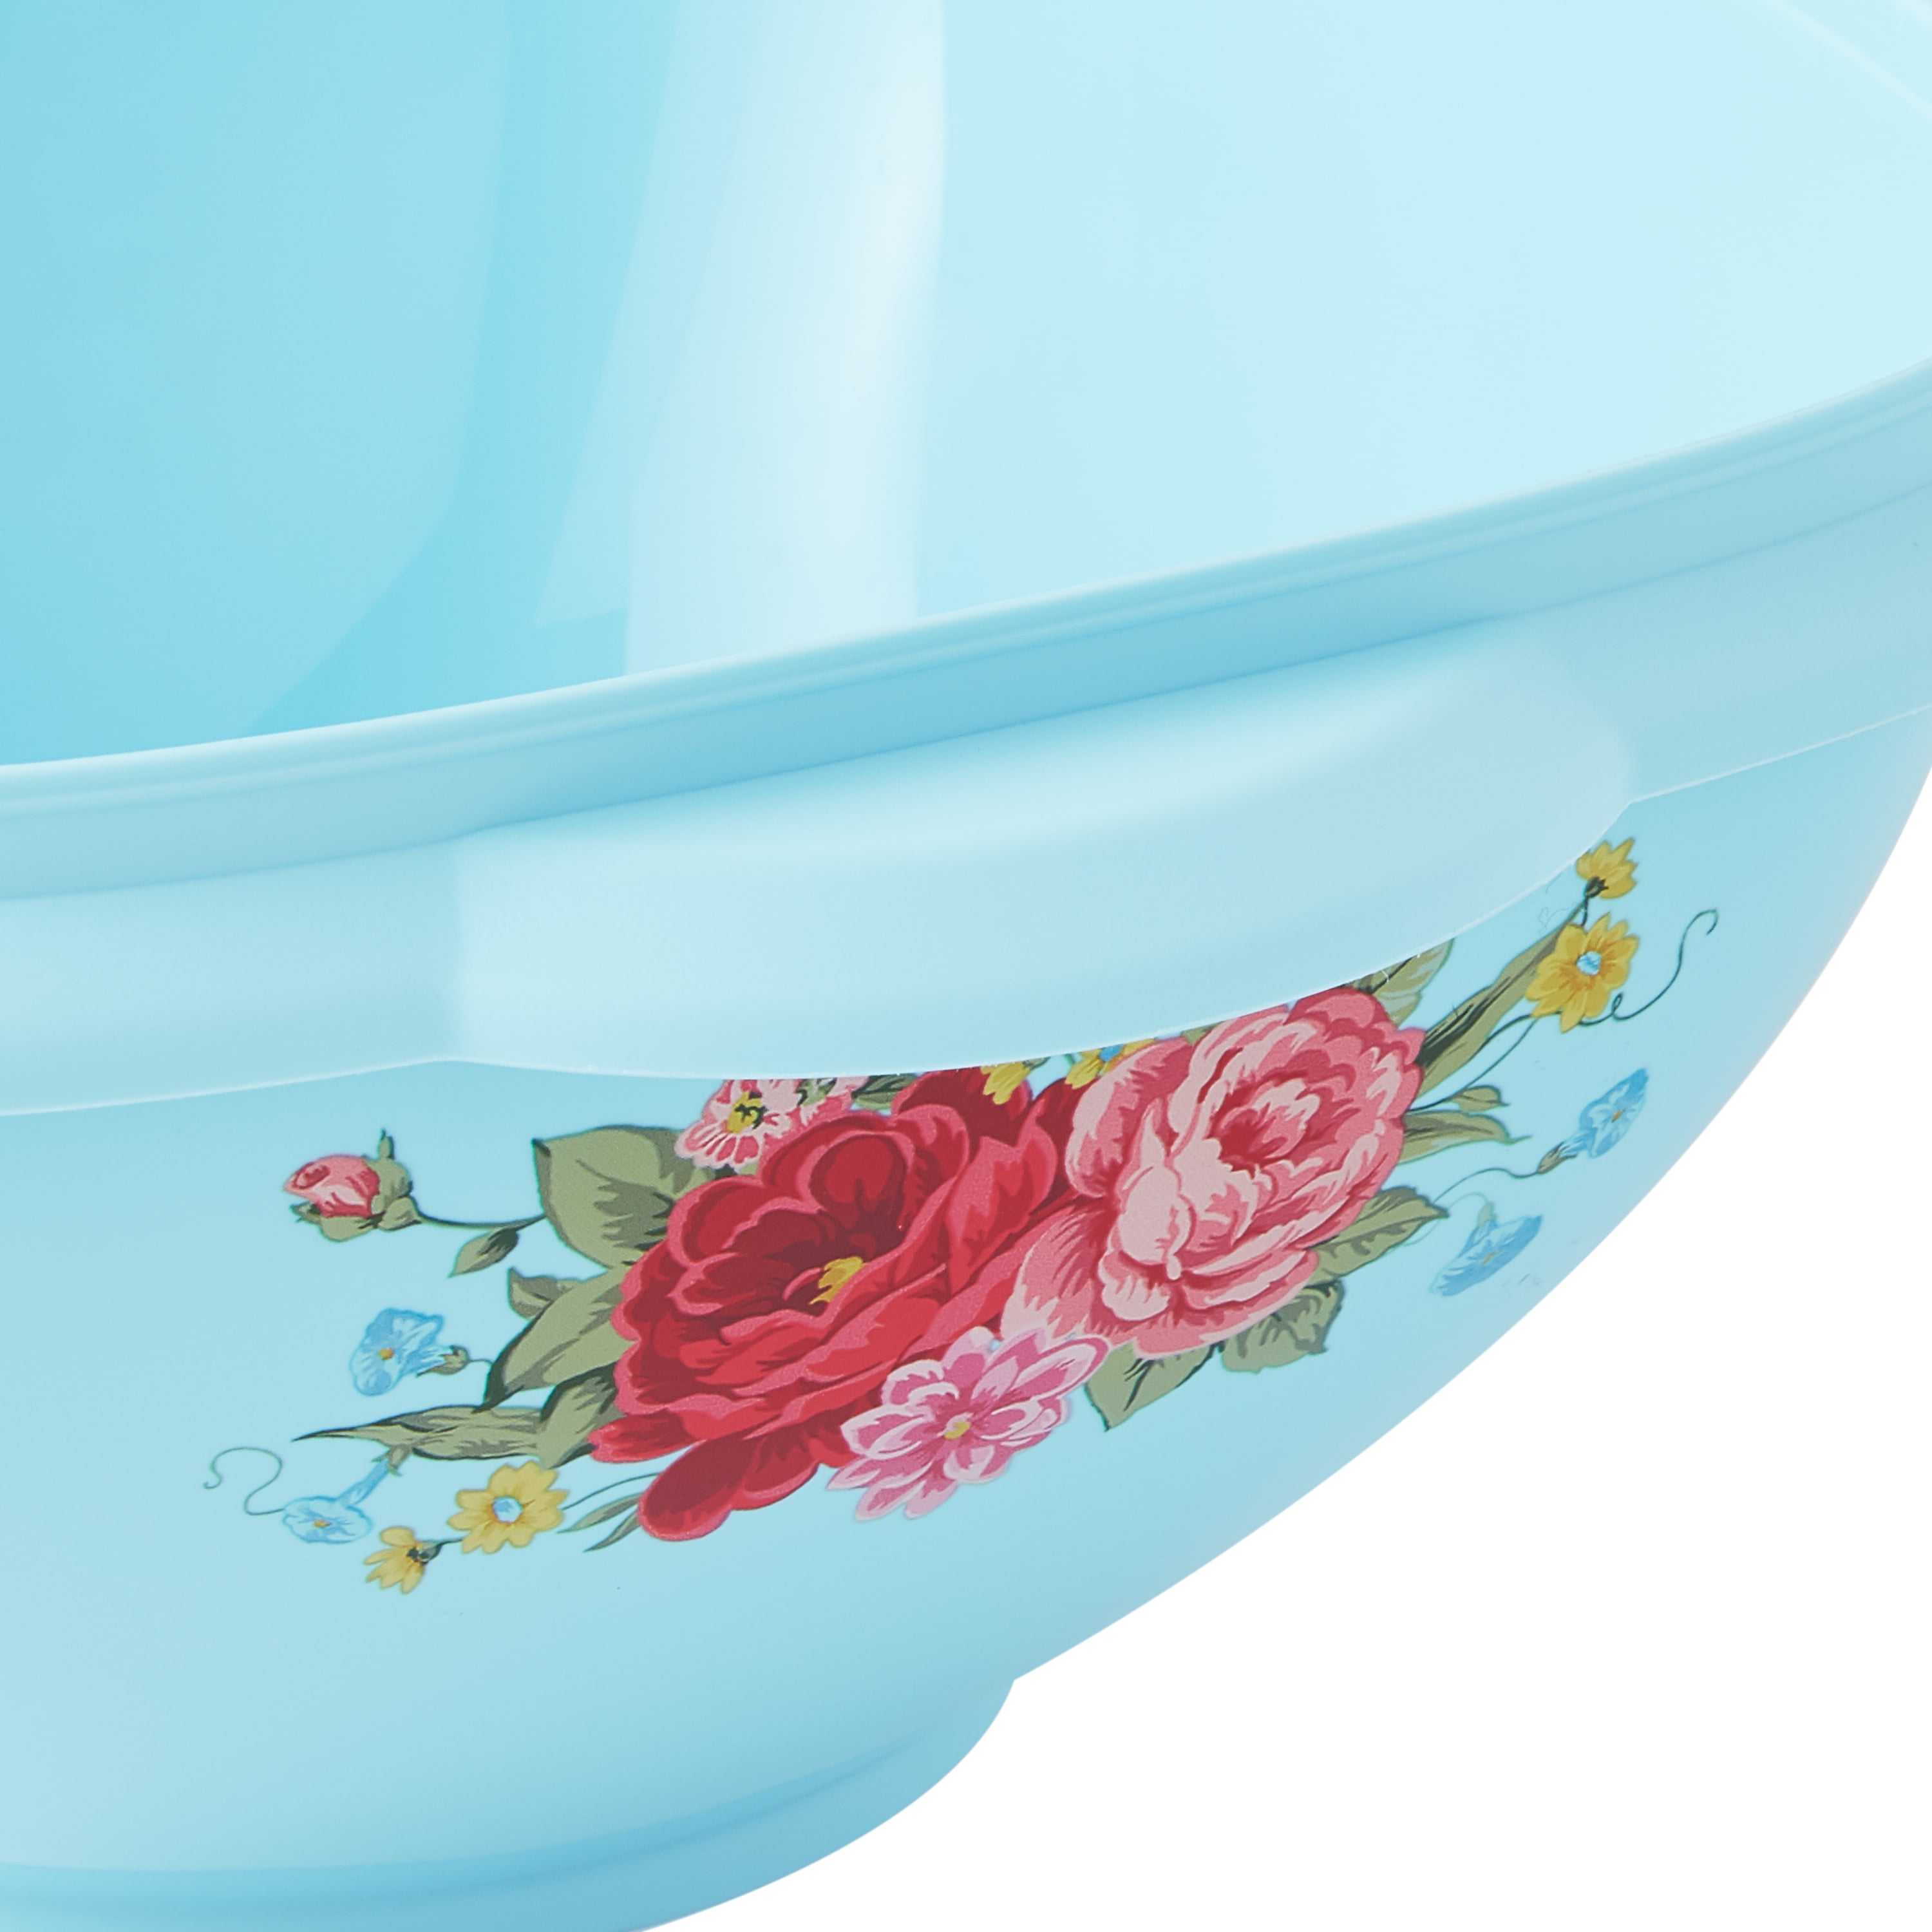 The Pioneer Woman Mixing Bowl Set with Lids, Sweet Romance, 18 Piece Set,  Melamine